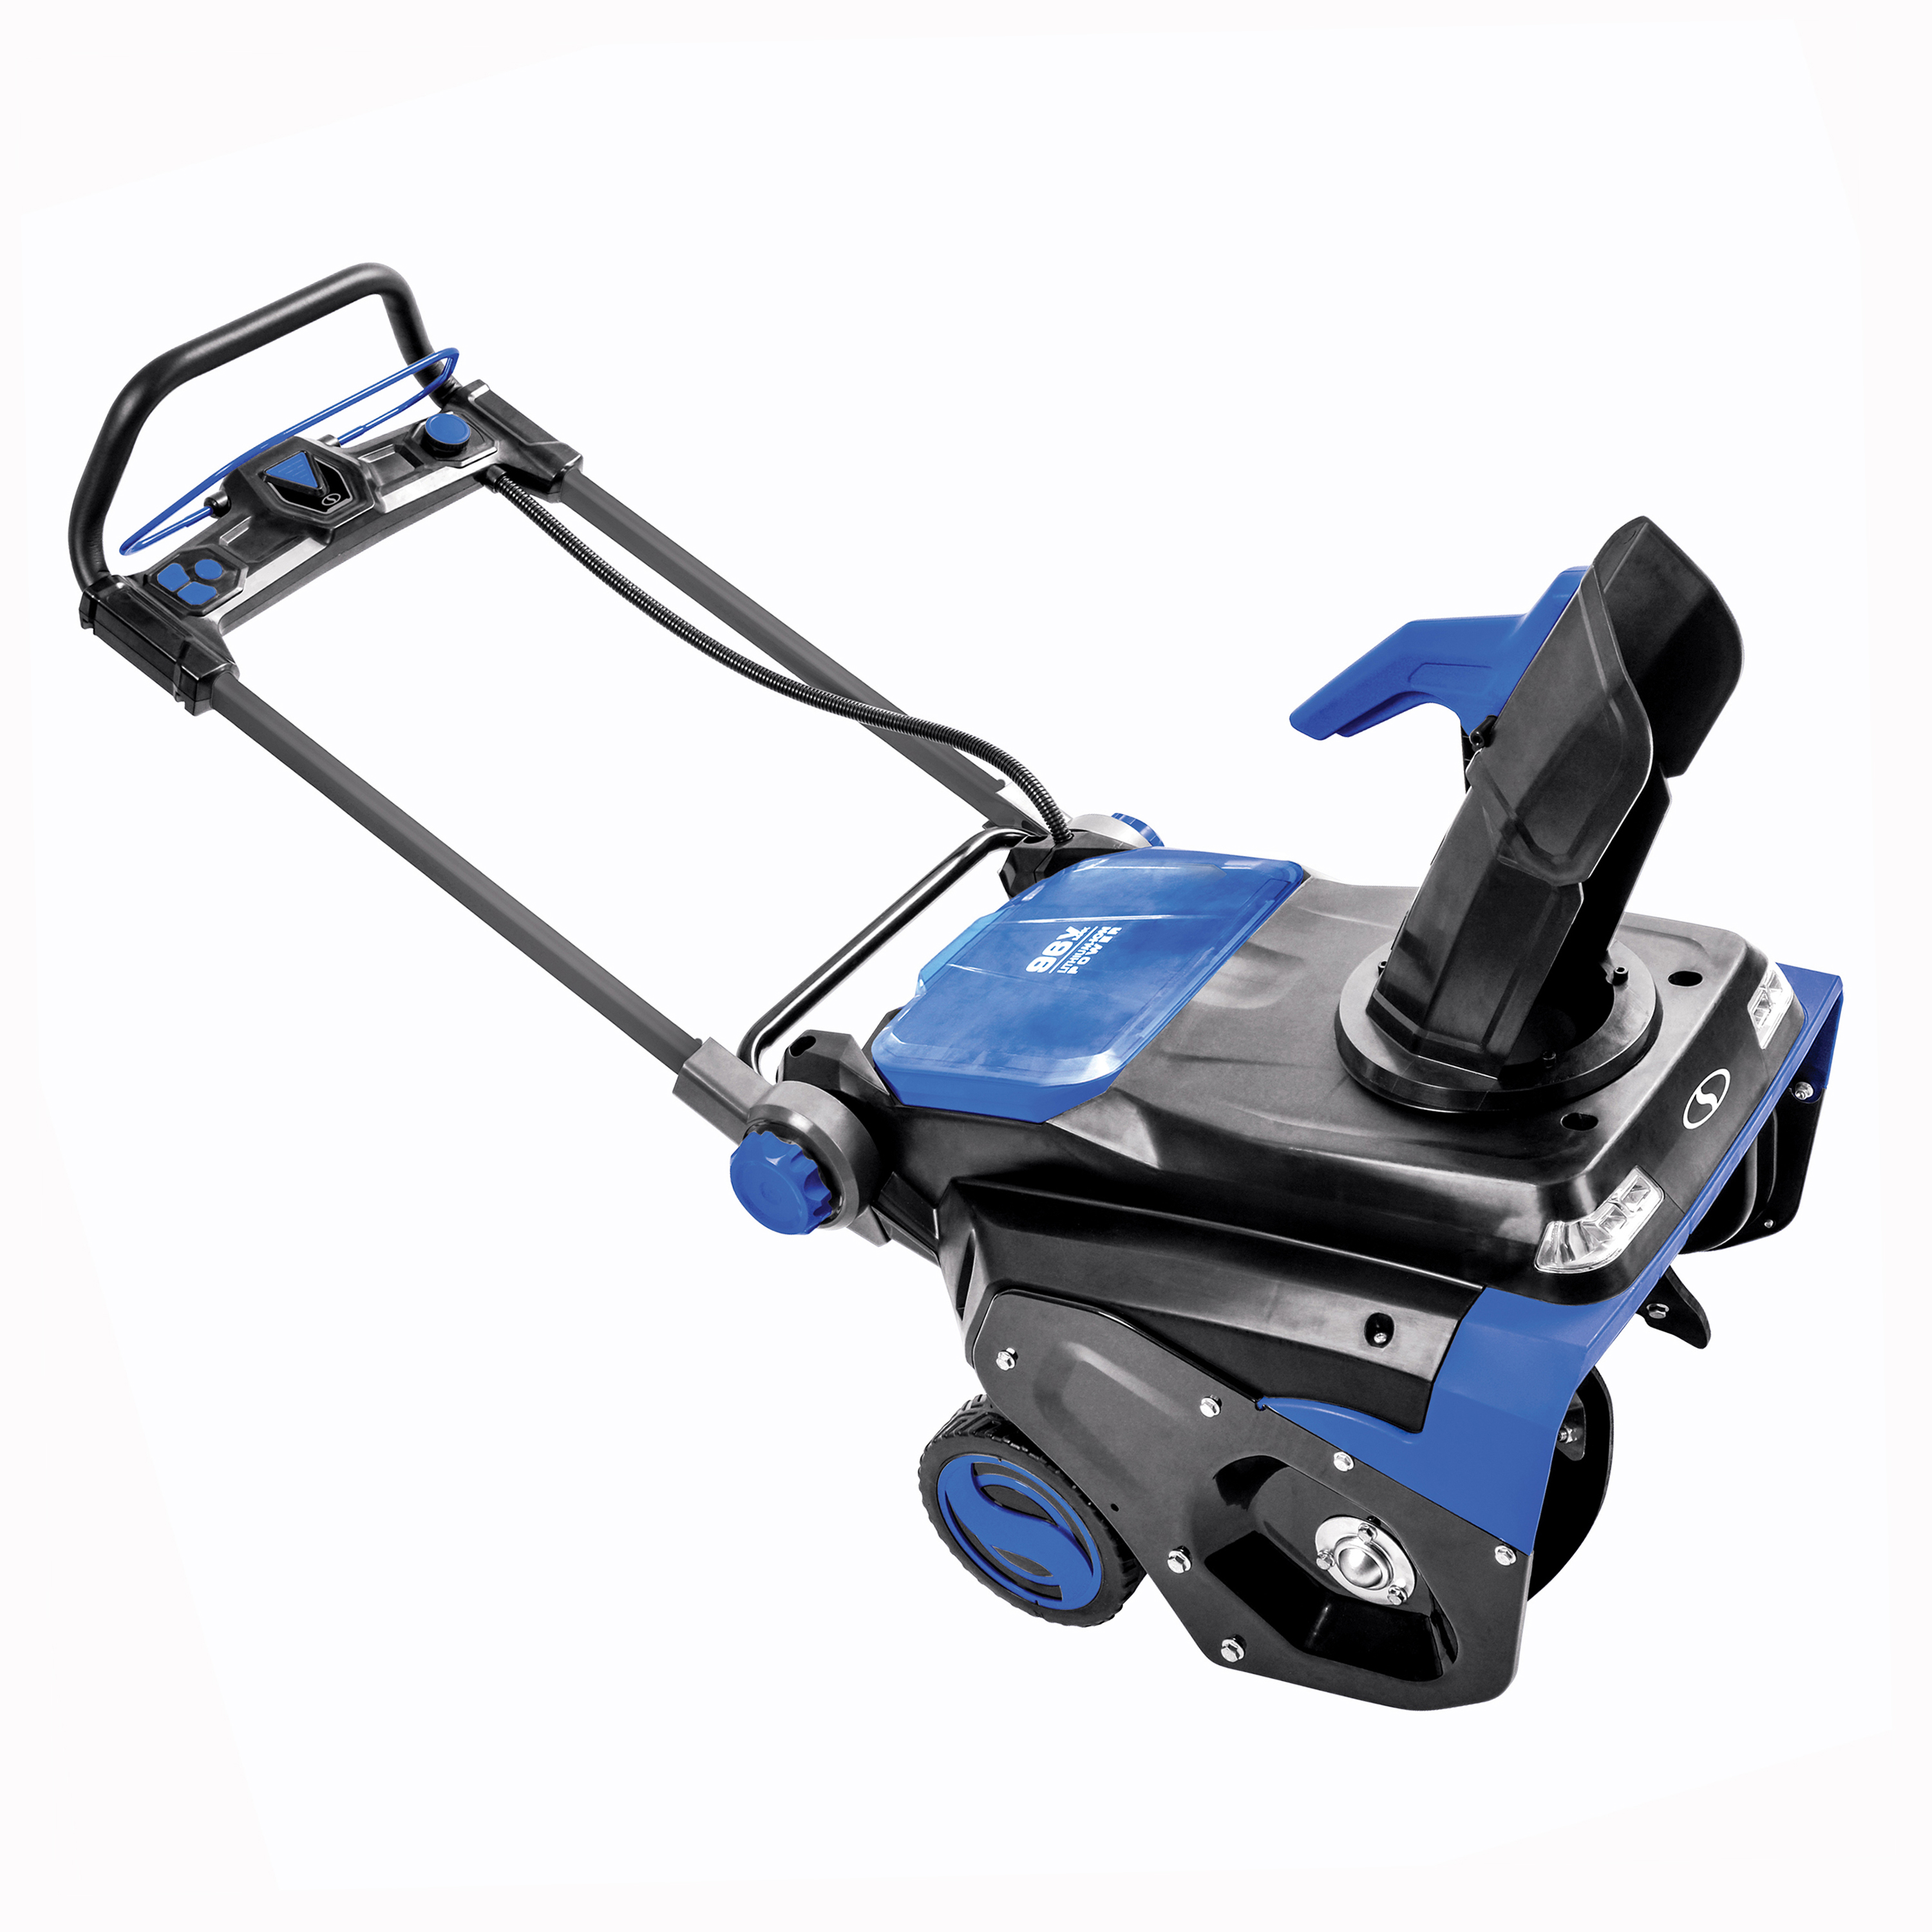 Snow Joe 96V 21-inch Brushless Single-Stage Cordless Snow Blower, 4 x 12.0-Ah Batteries & 2 x Chargers - image 3 of 7